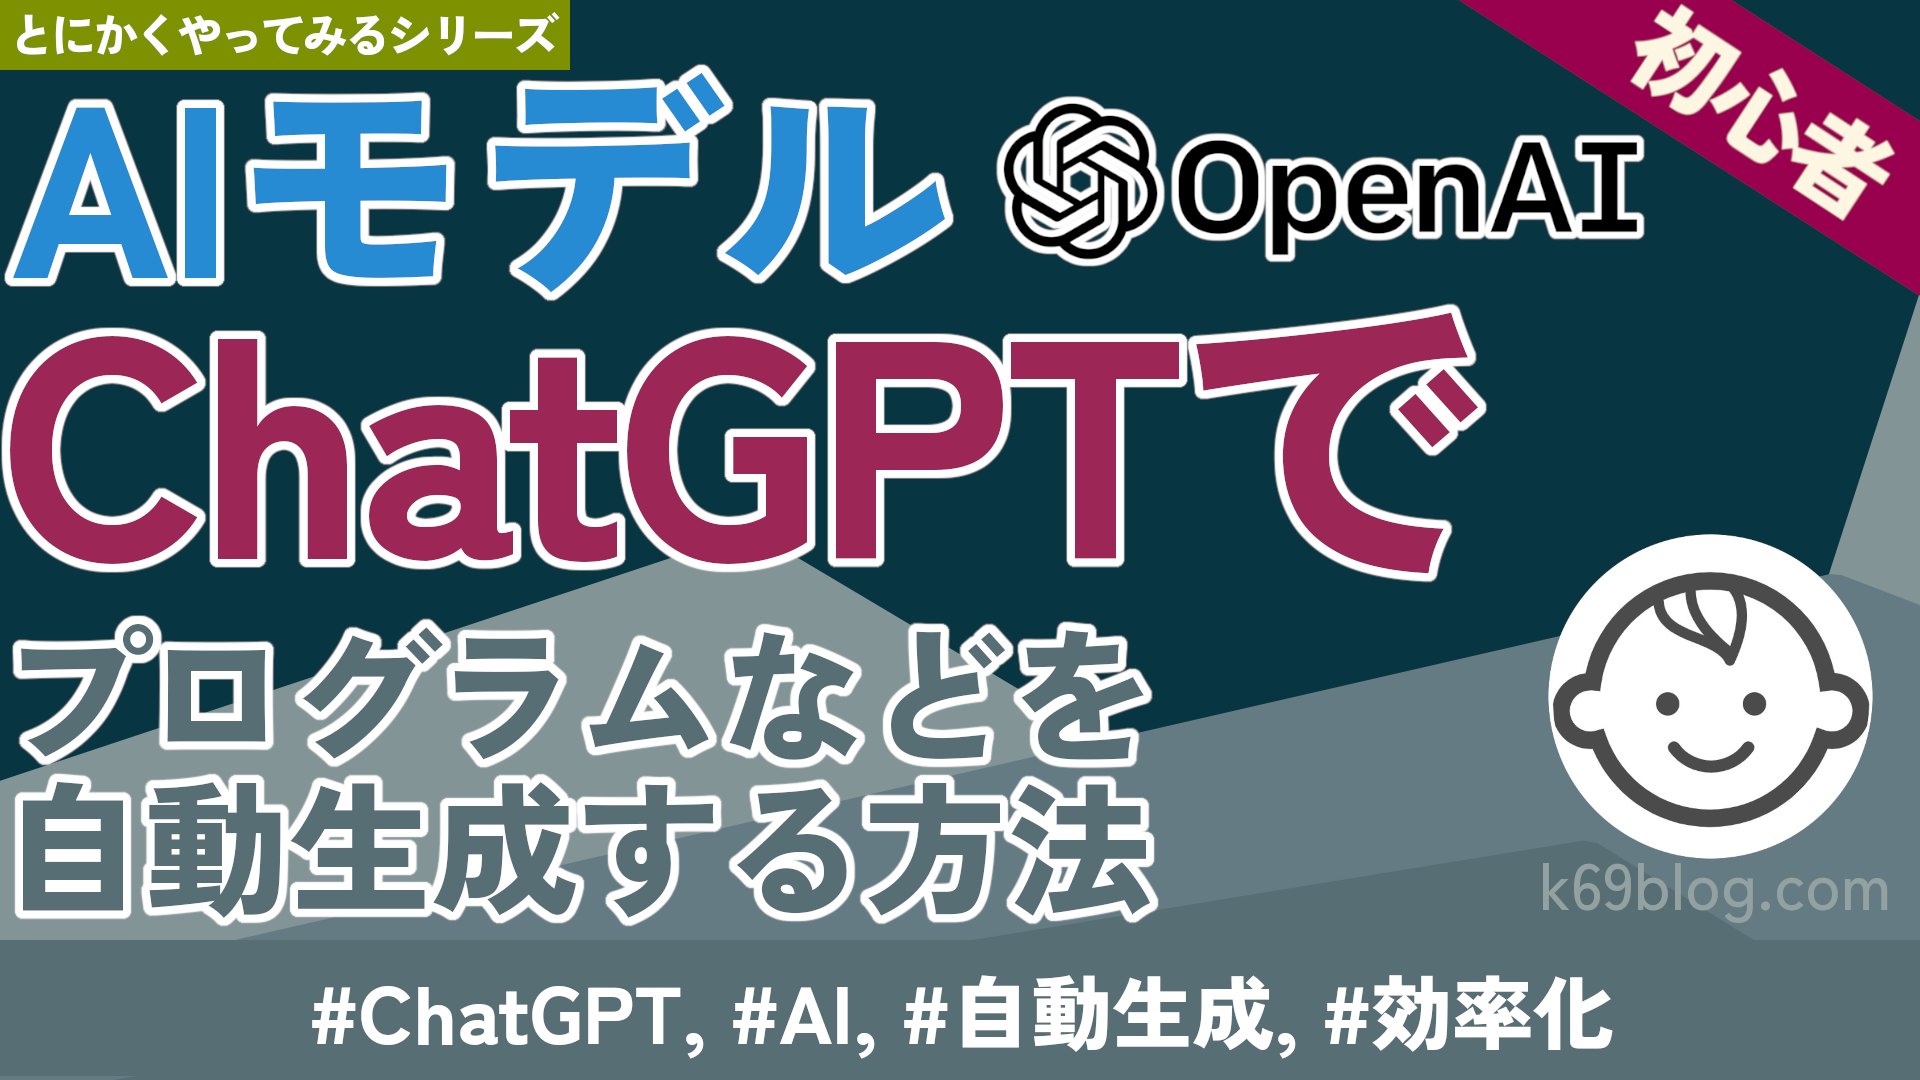 Cover Image for AIモデル Chat GPT でプログラムなどを自動生成する方法